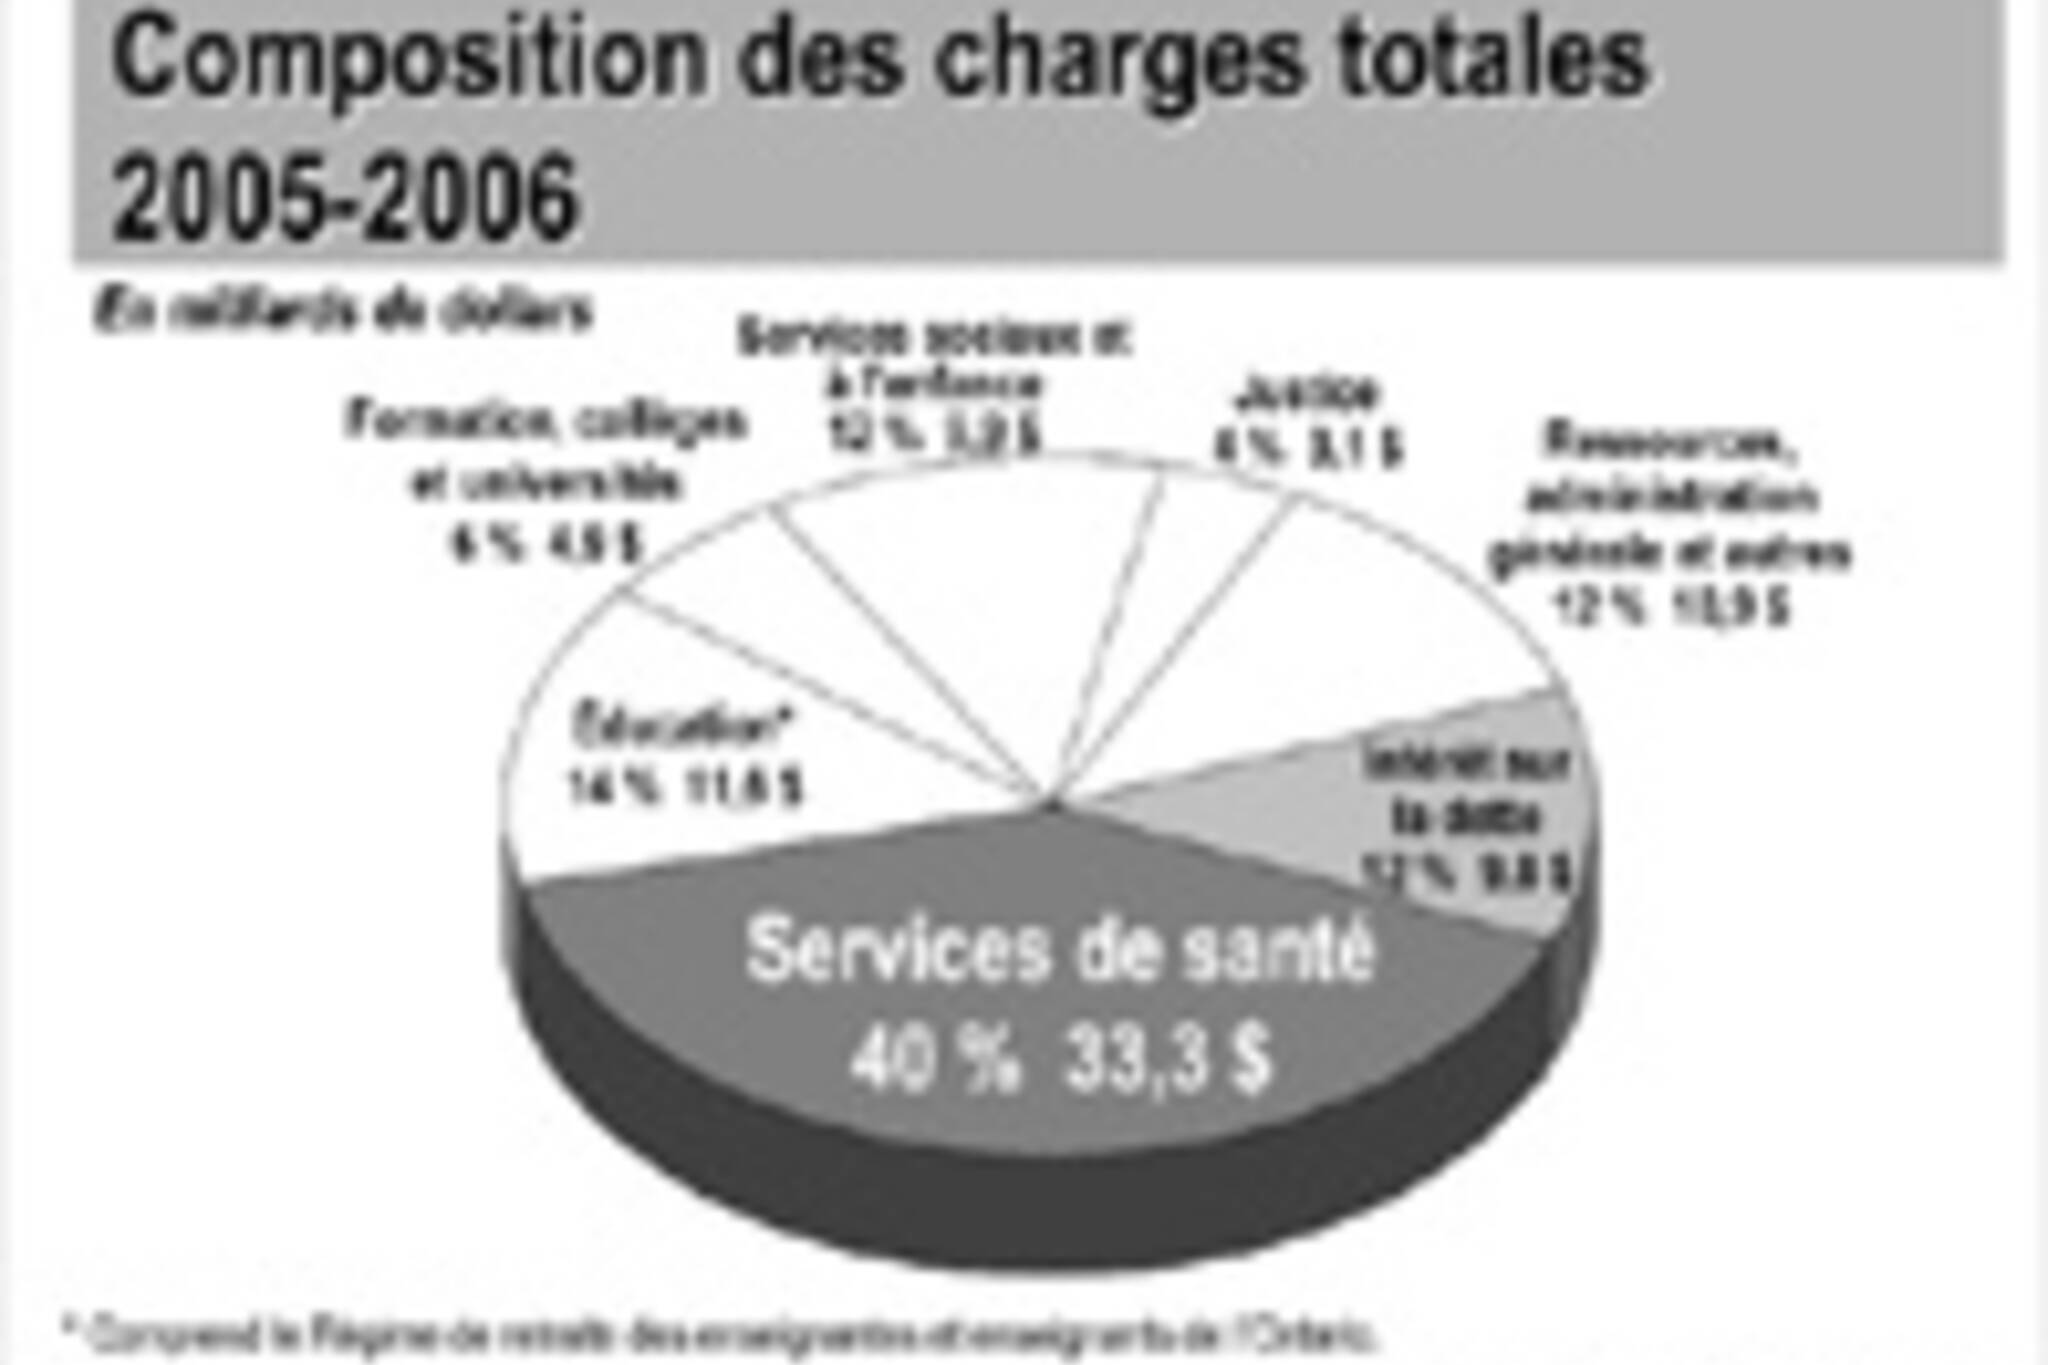 A pie-graph showing the assemblage of charges from the very long Ontario budget document.  Image from www.fin.gov.on.ca